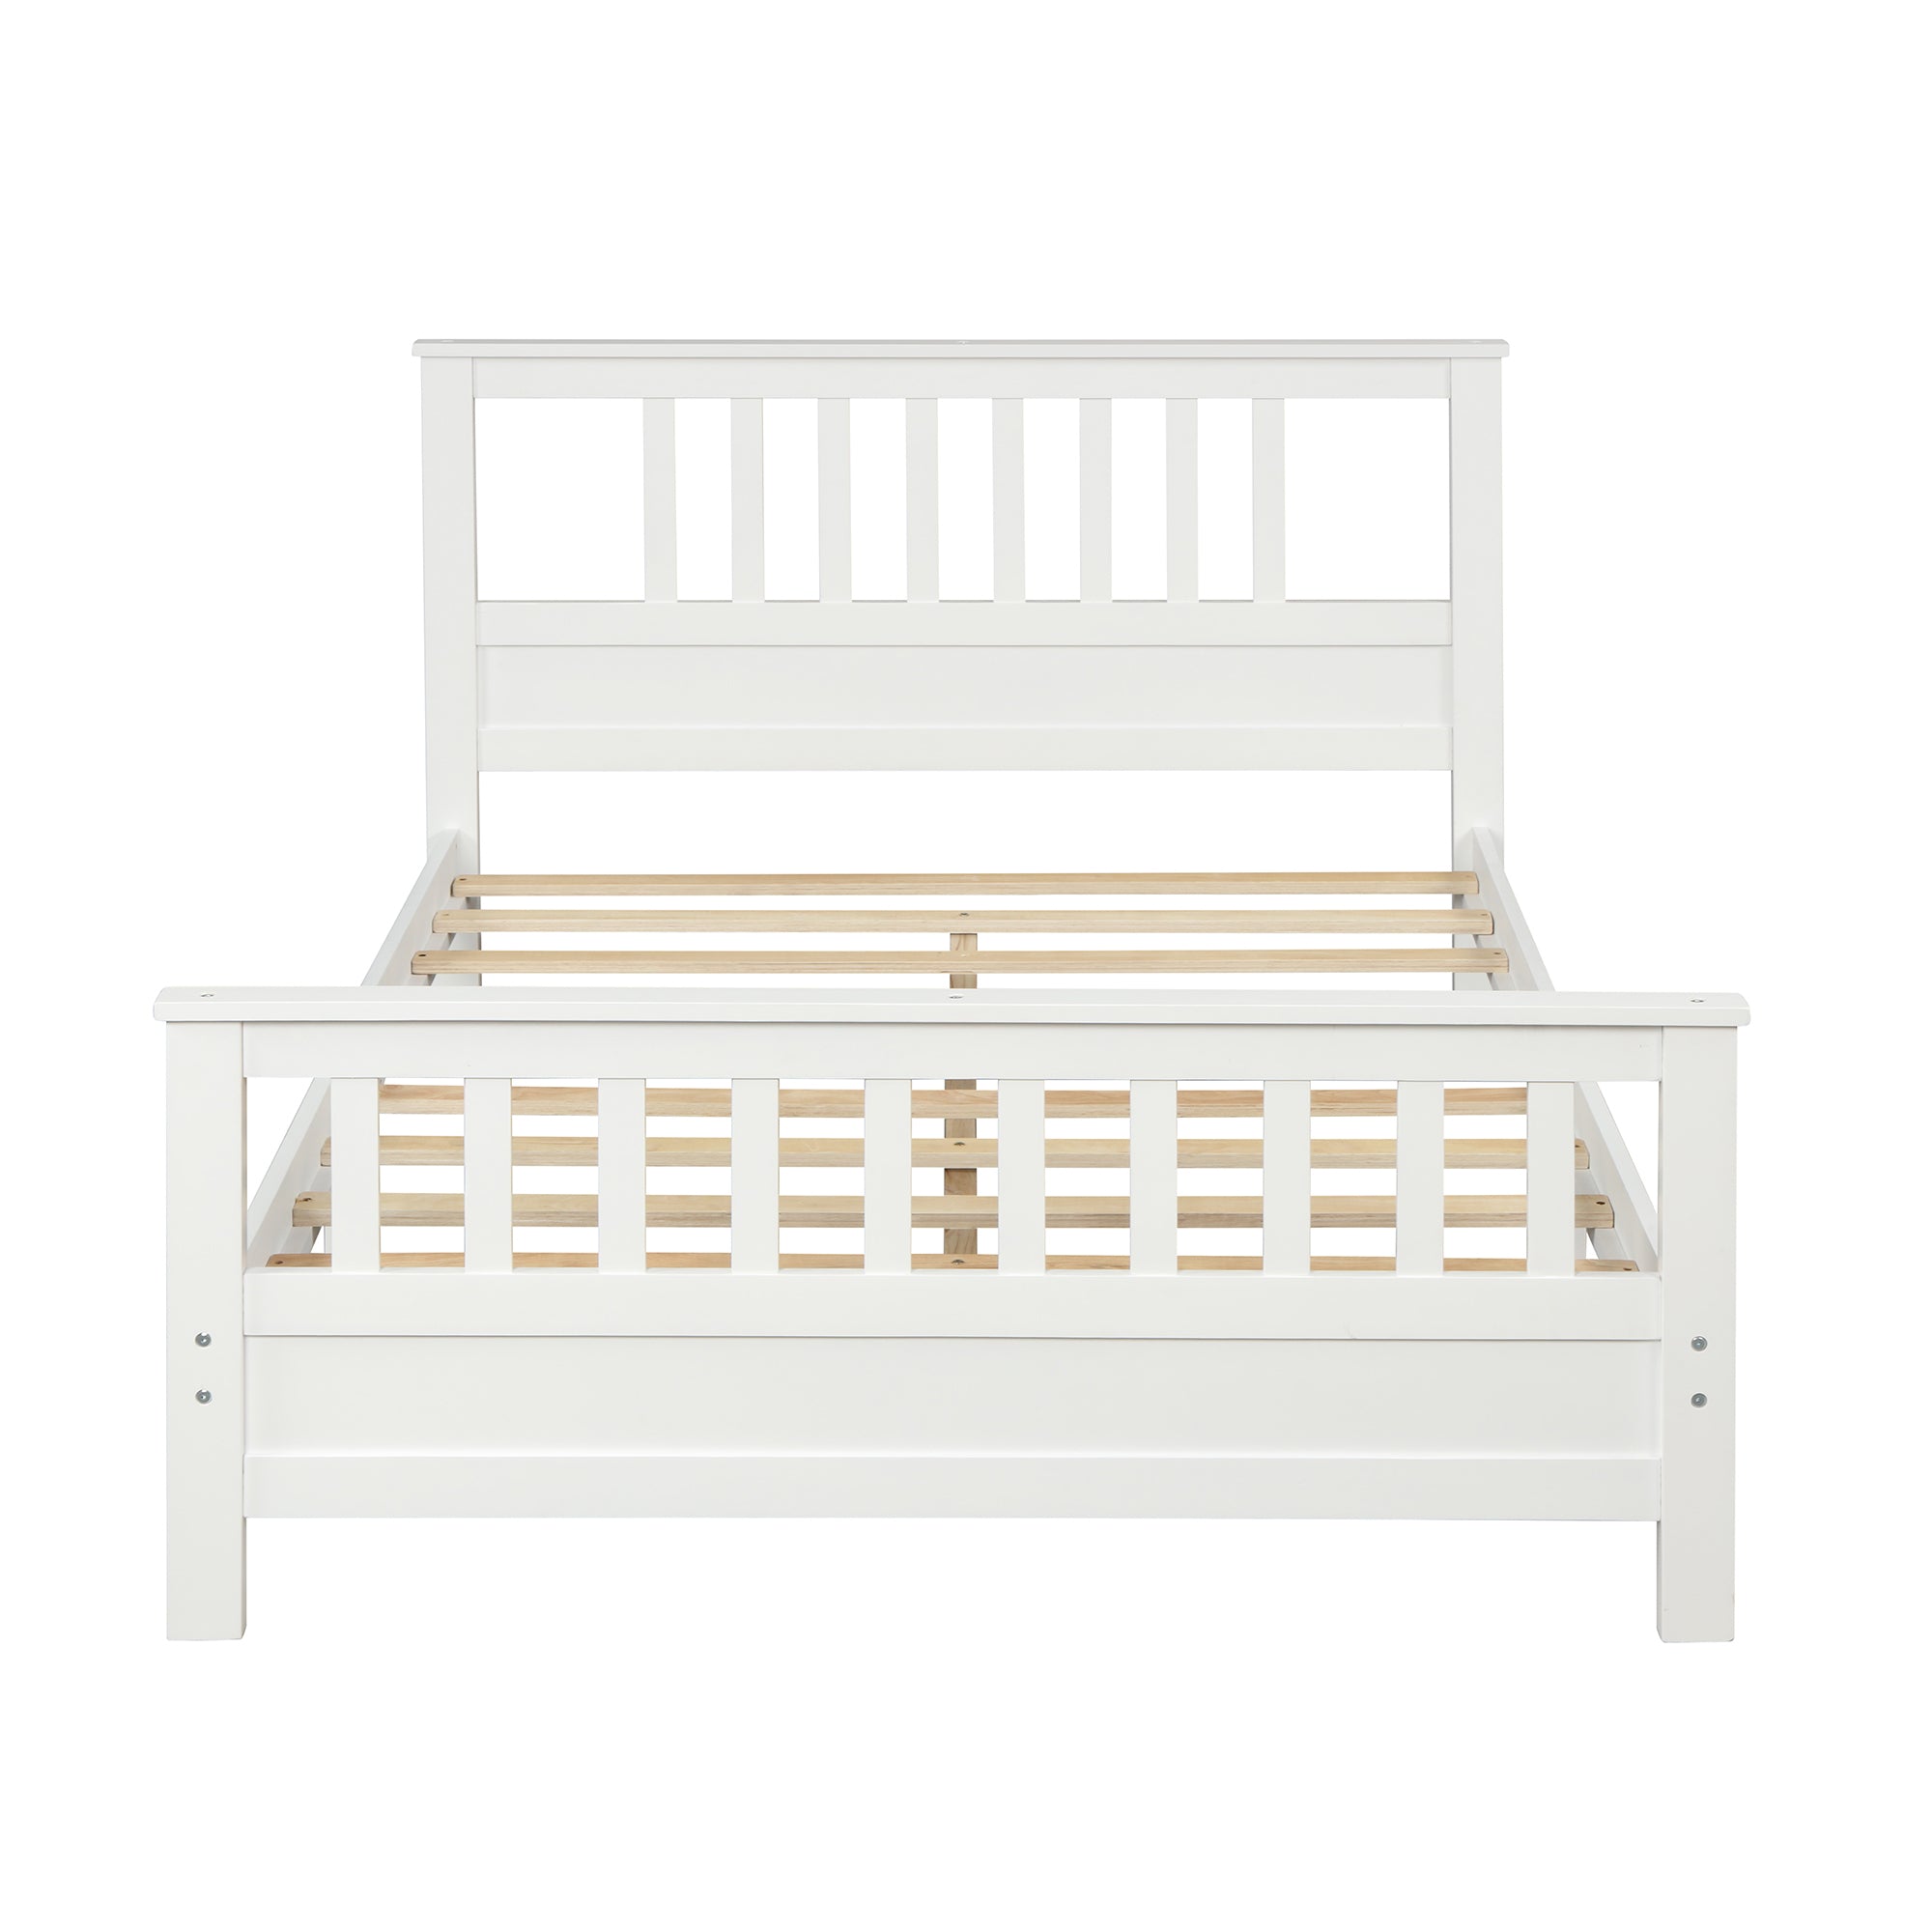 White Wooden Platform Bed Frame with Headboard and Footboard by: Alabama Beds